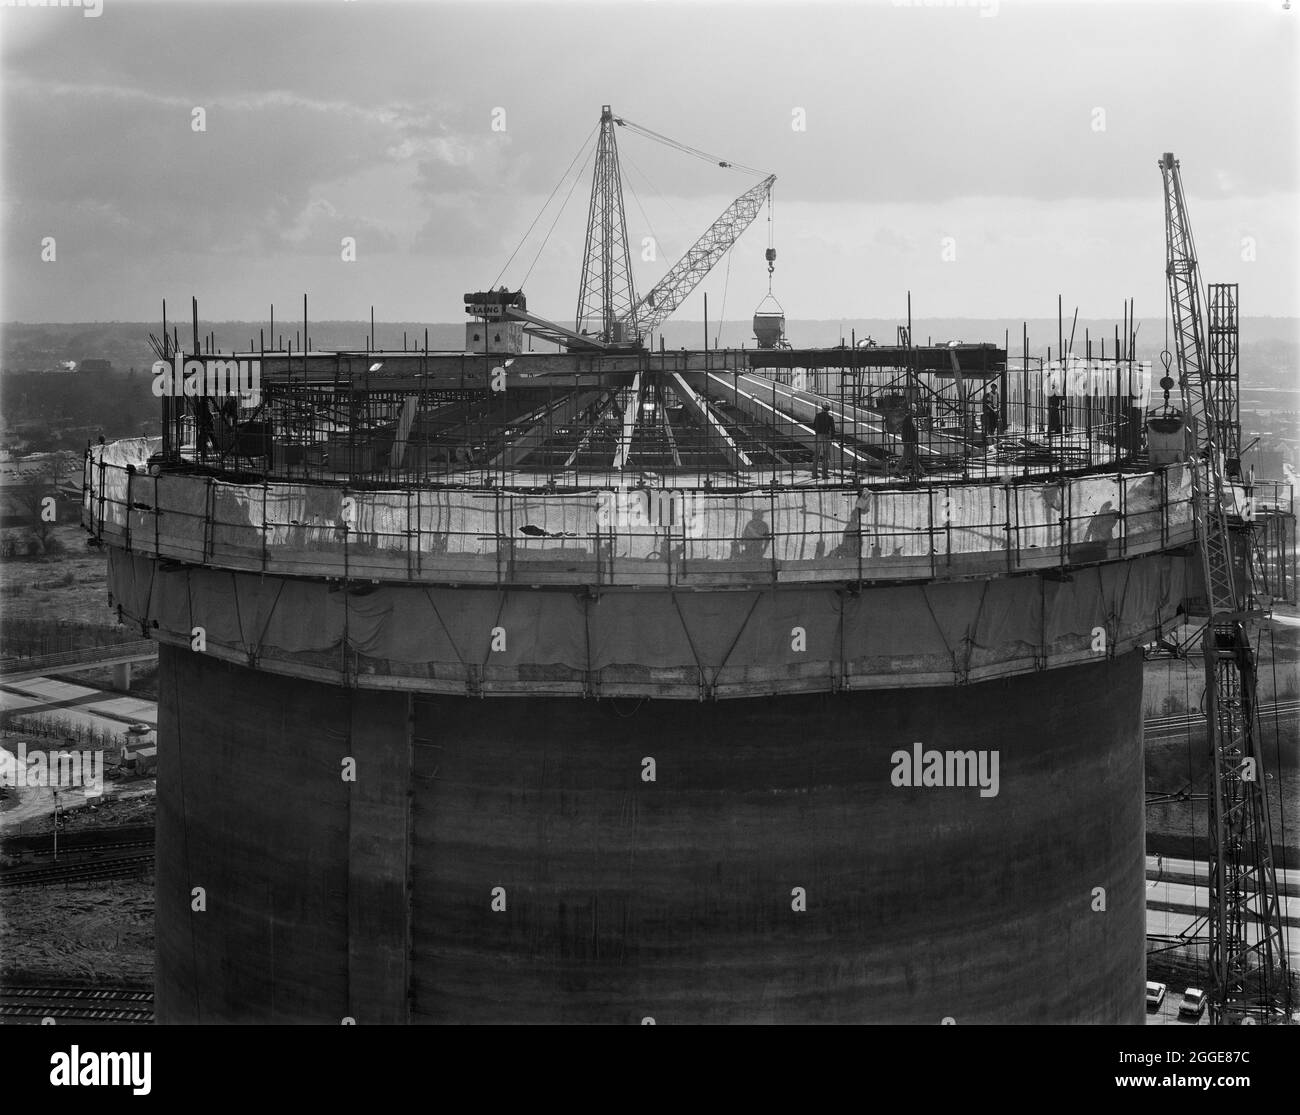 A view of the working platform with a central crane at the top of a silo during construction at Bury St Edmunds Sugar Beet Factory, showing the framework of the conical roof. A sugar factory began operating at Bury St Edmunds in 1924. In 1972 Laing were awarded the contract to build four sugar silos and a new beet handling plant for the British Sugar Corporation at Bury St Edmunds, and in 1981/82 a further 25,000 tonne capacity sugar silo was built. Stock Photo